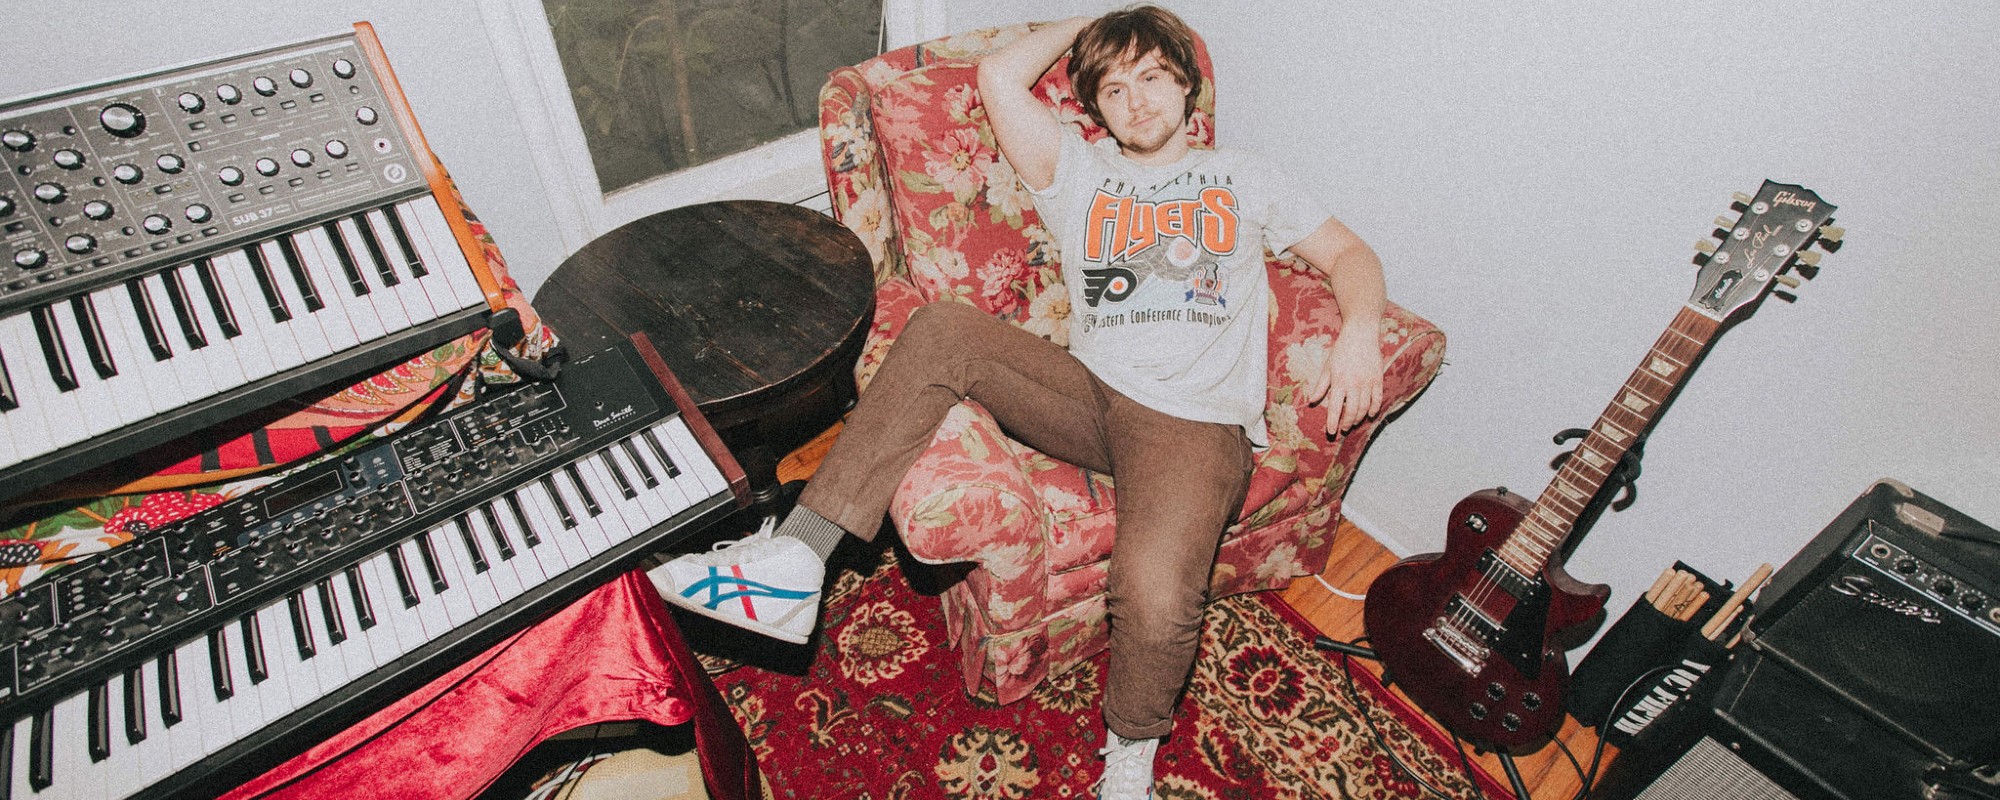 Ellington Forges His Own Path With Dirty Pop/Rock Debut EP